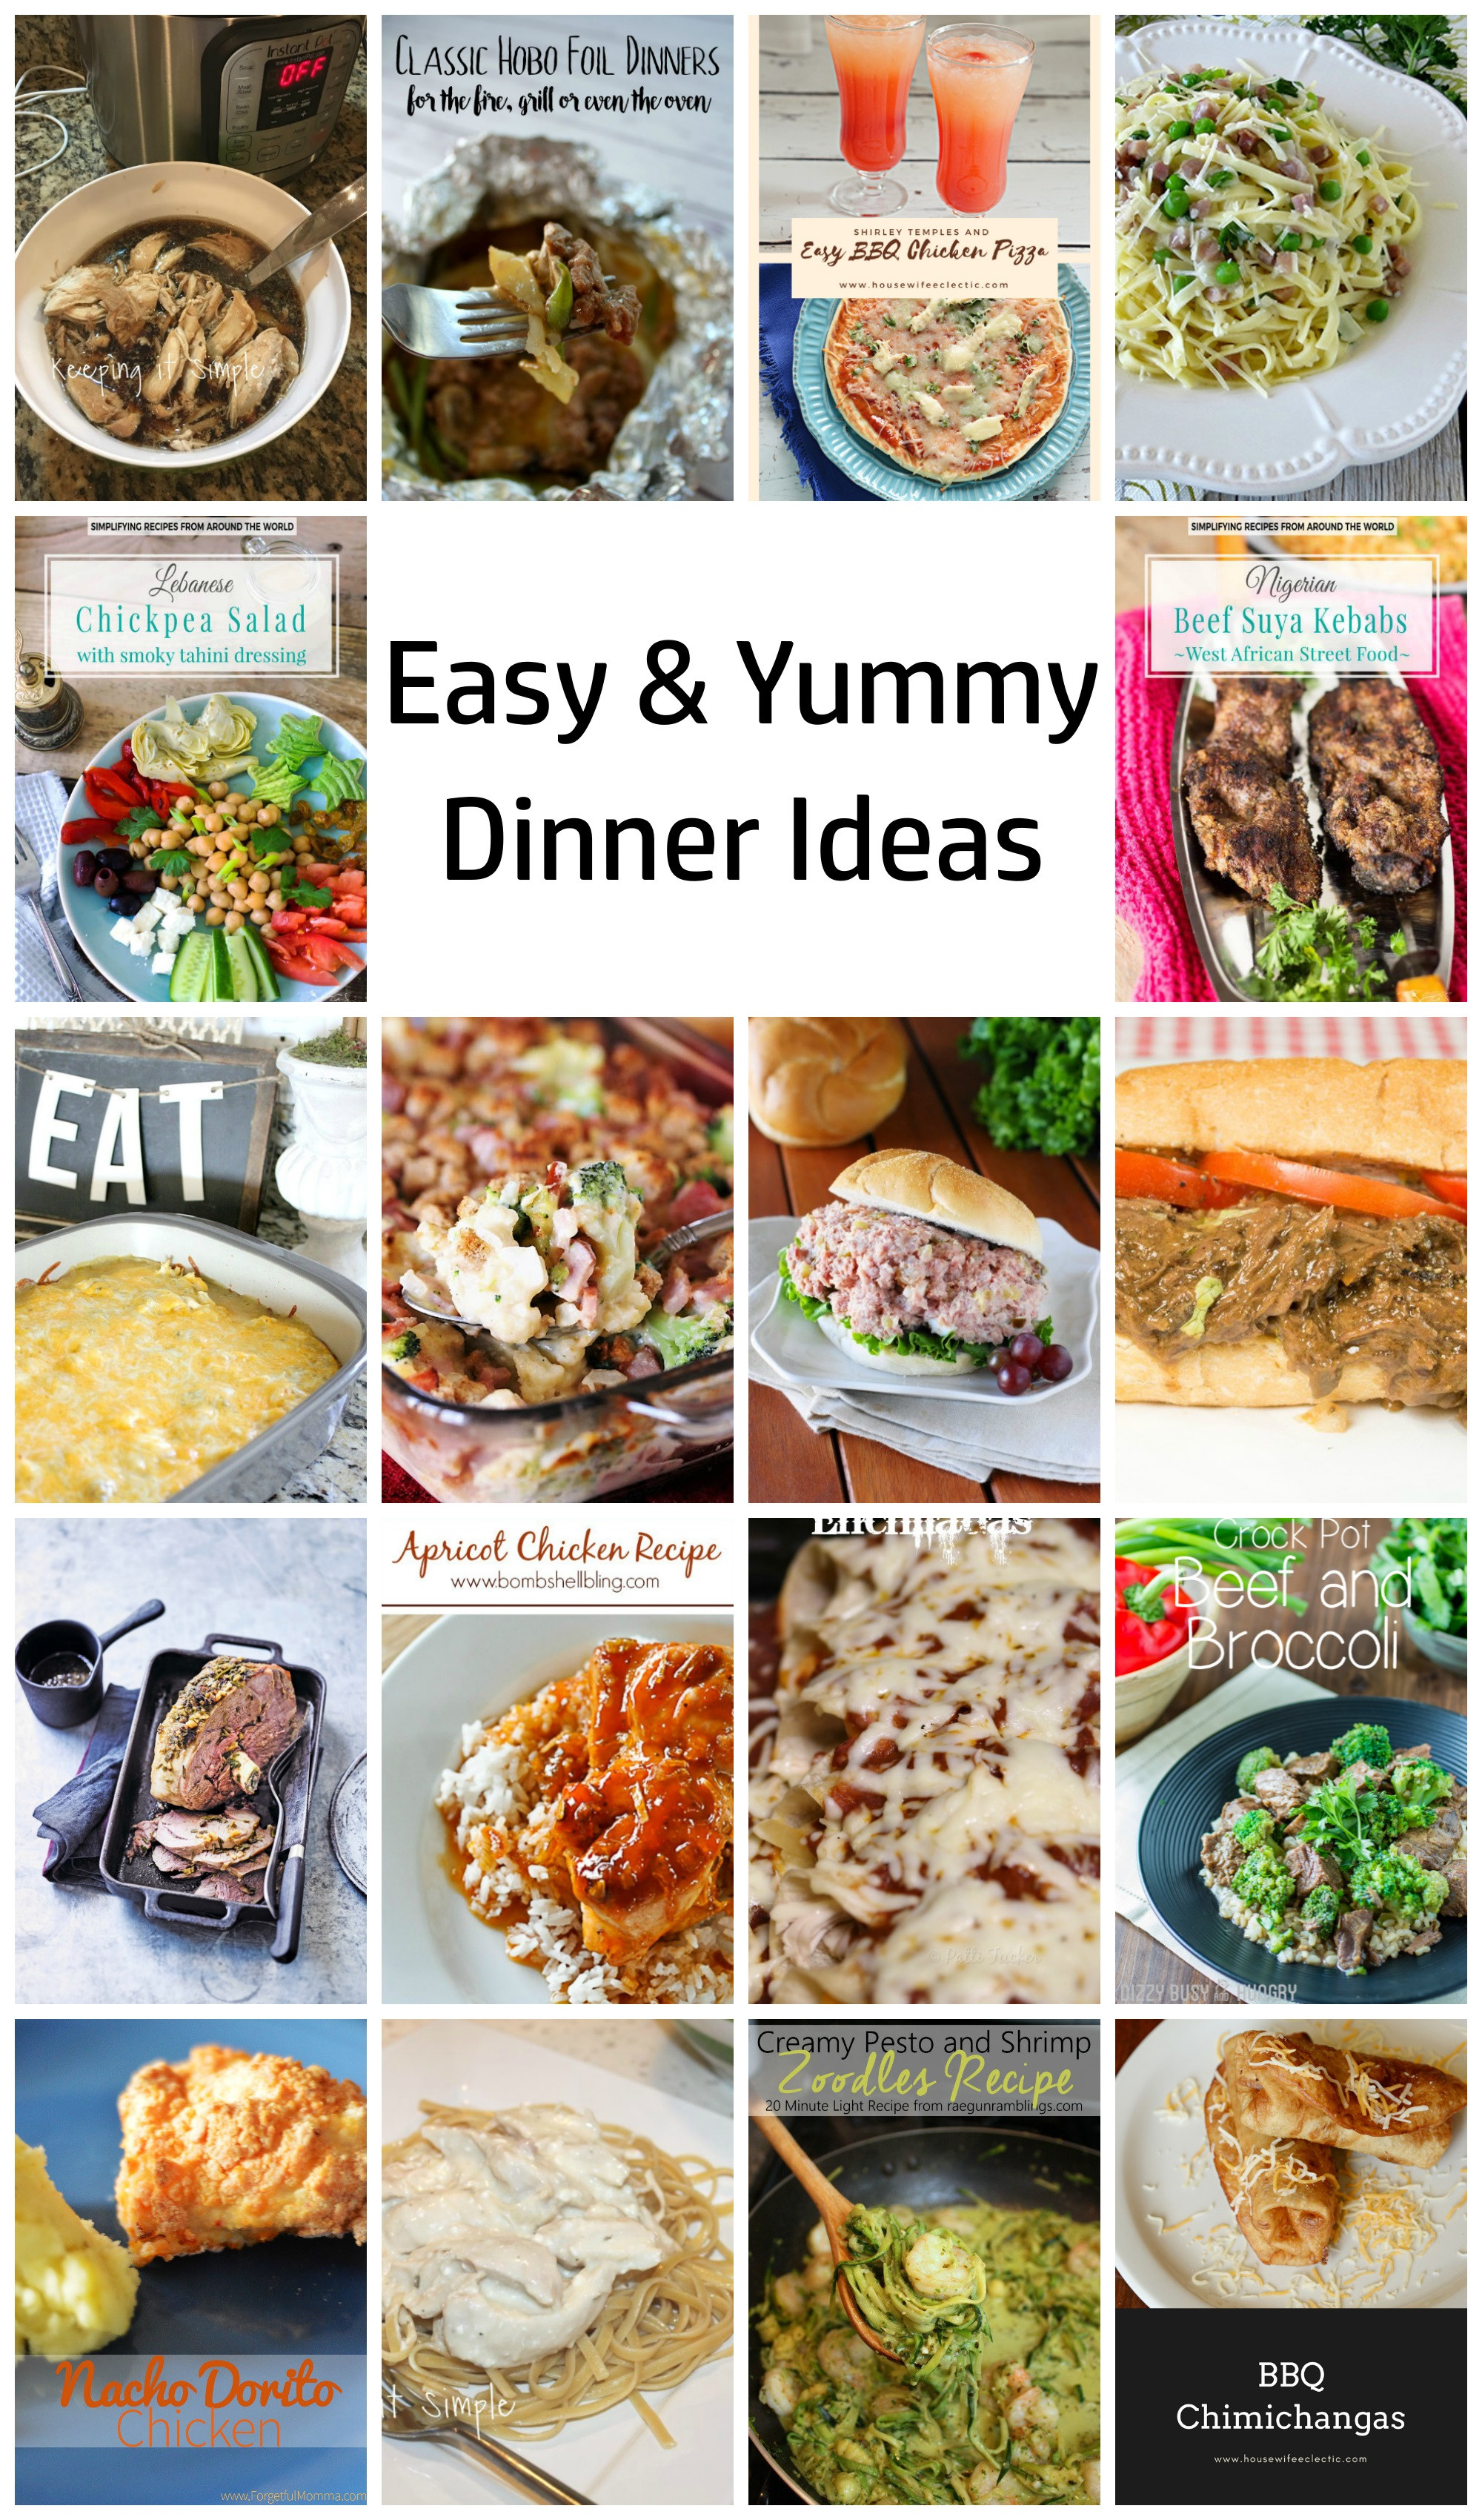 Easy Dinner Party Ideas For 8
 Easy Dinner Ideas MMM 427 Block Party • Keeping it Simple